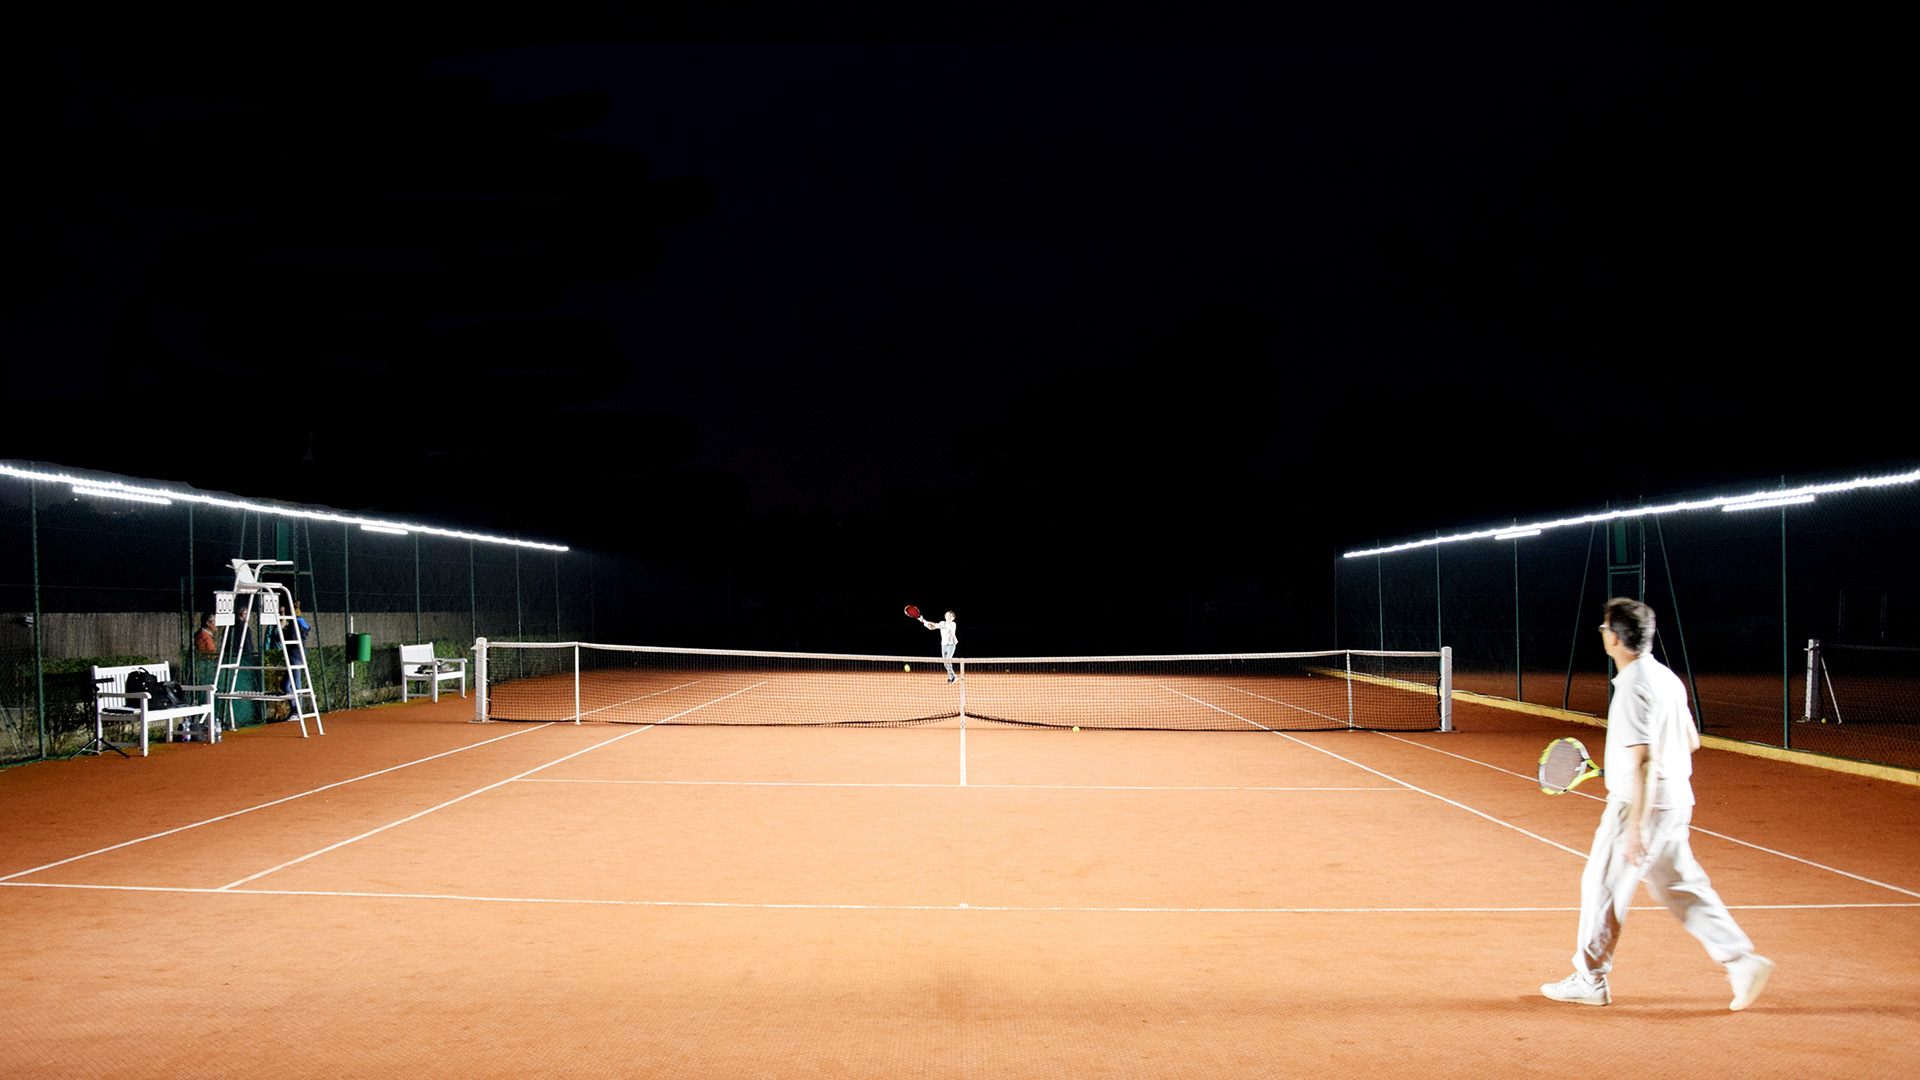 New advances in LED tennis court lighting from Tweener® provide outstanding court illumination at a fraction of the cost.